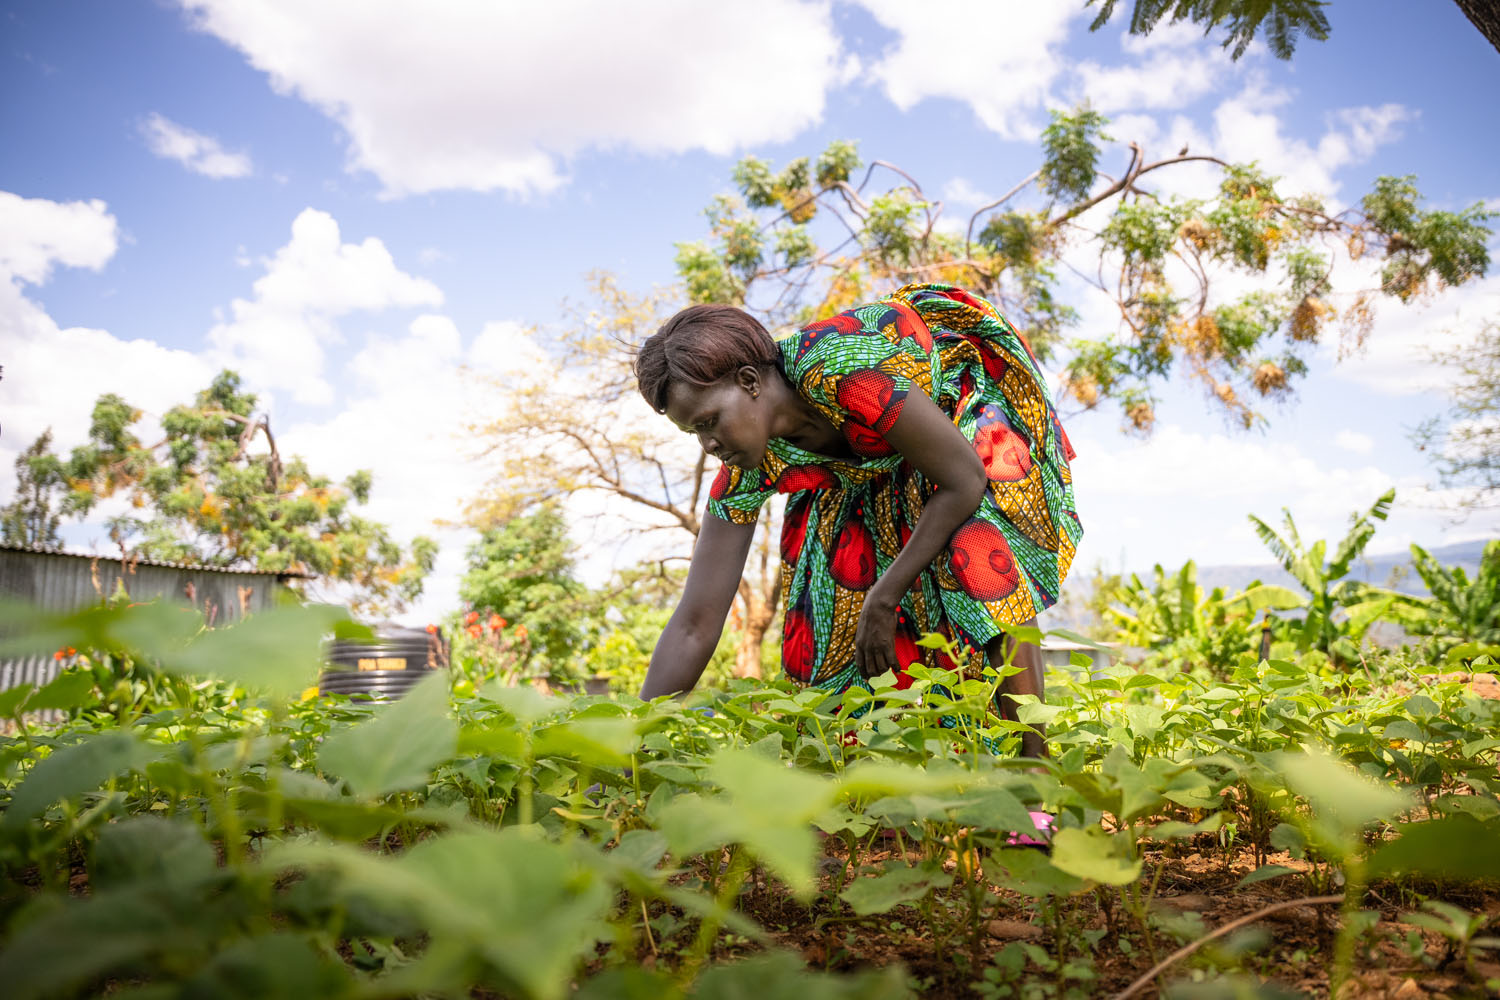 A Kenyan woman wearing a green and red dress bends over her garden, picking something from the ground. 